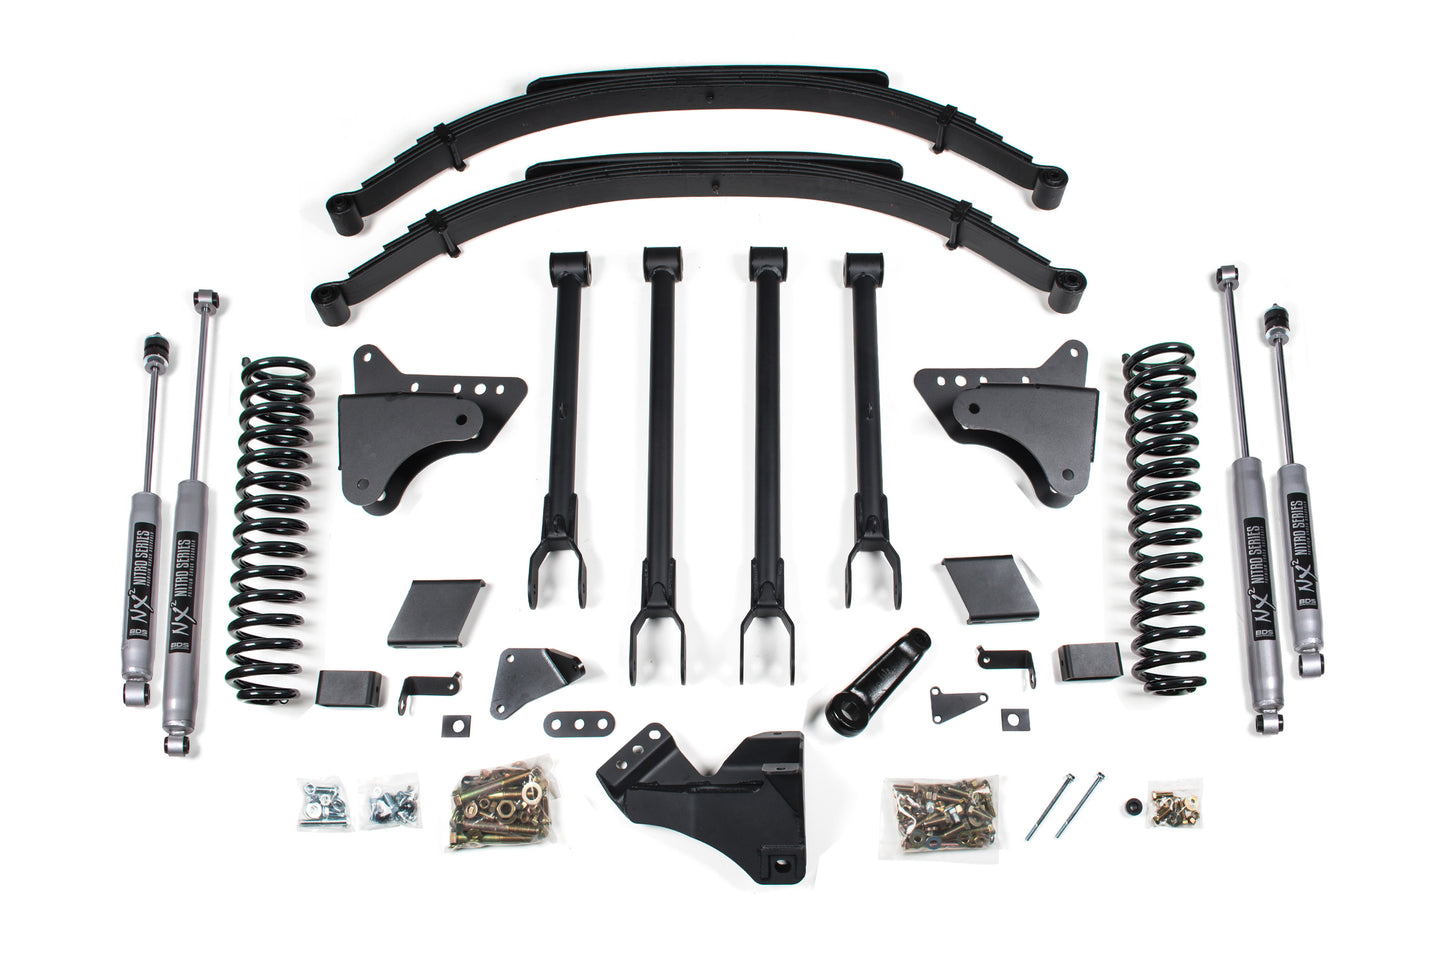 8 Inch Lift Kit - 4-Link Conversion - Ford F250/F350 Super Duty (11-16) 4WD - Diesel - Off-Road Express